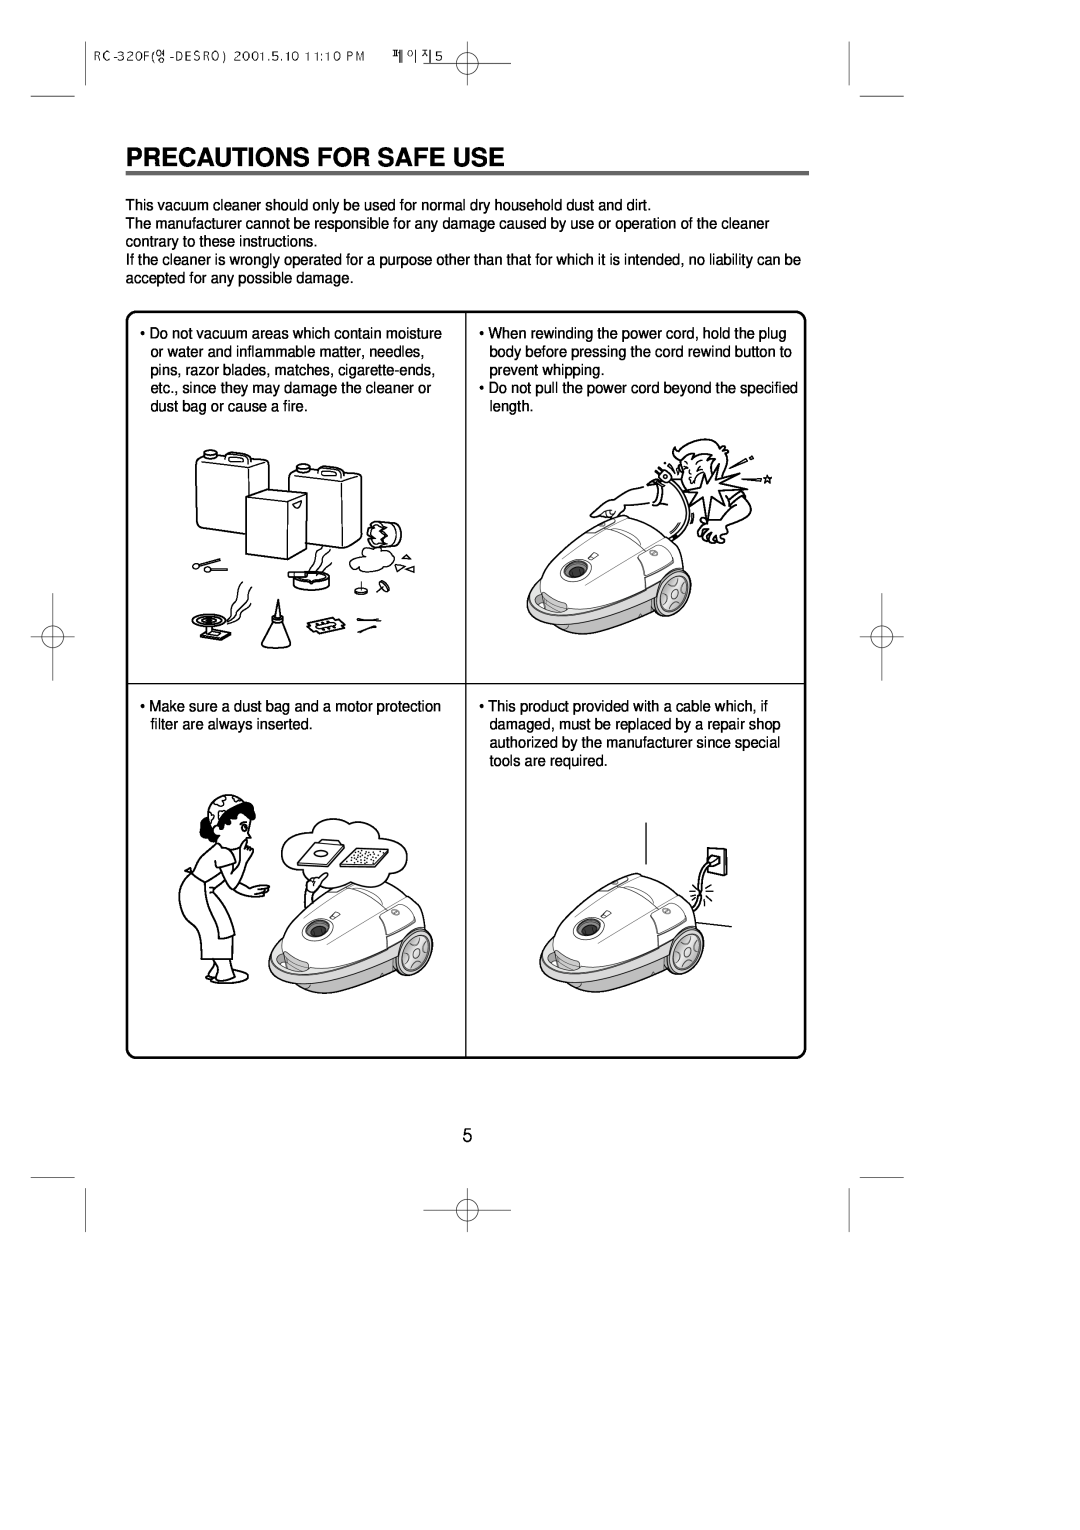 Daewoo RC-320F owner manual Precautions For Safe Use 